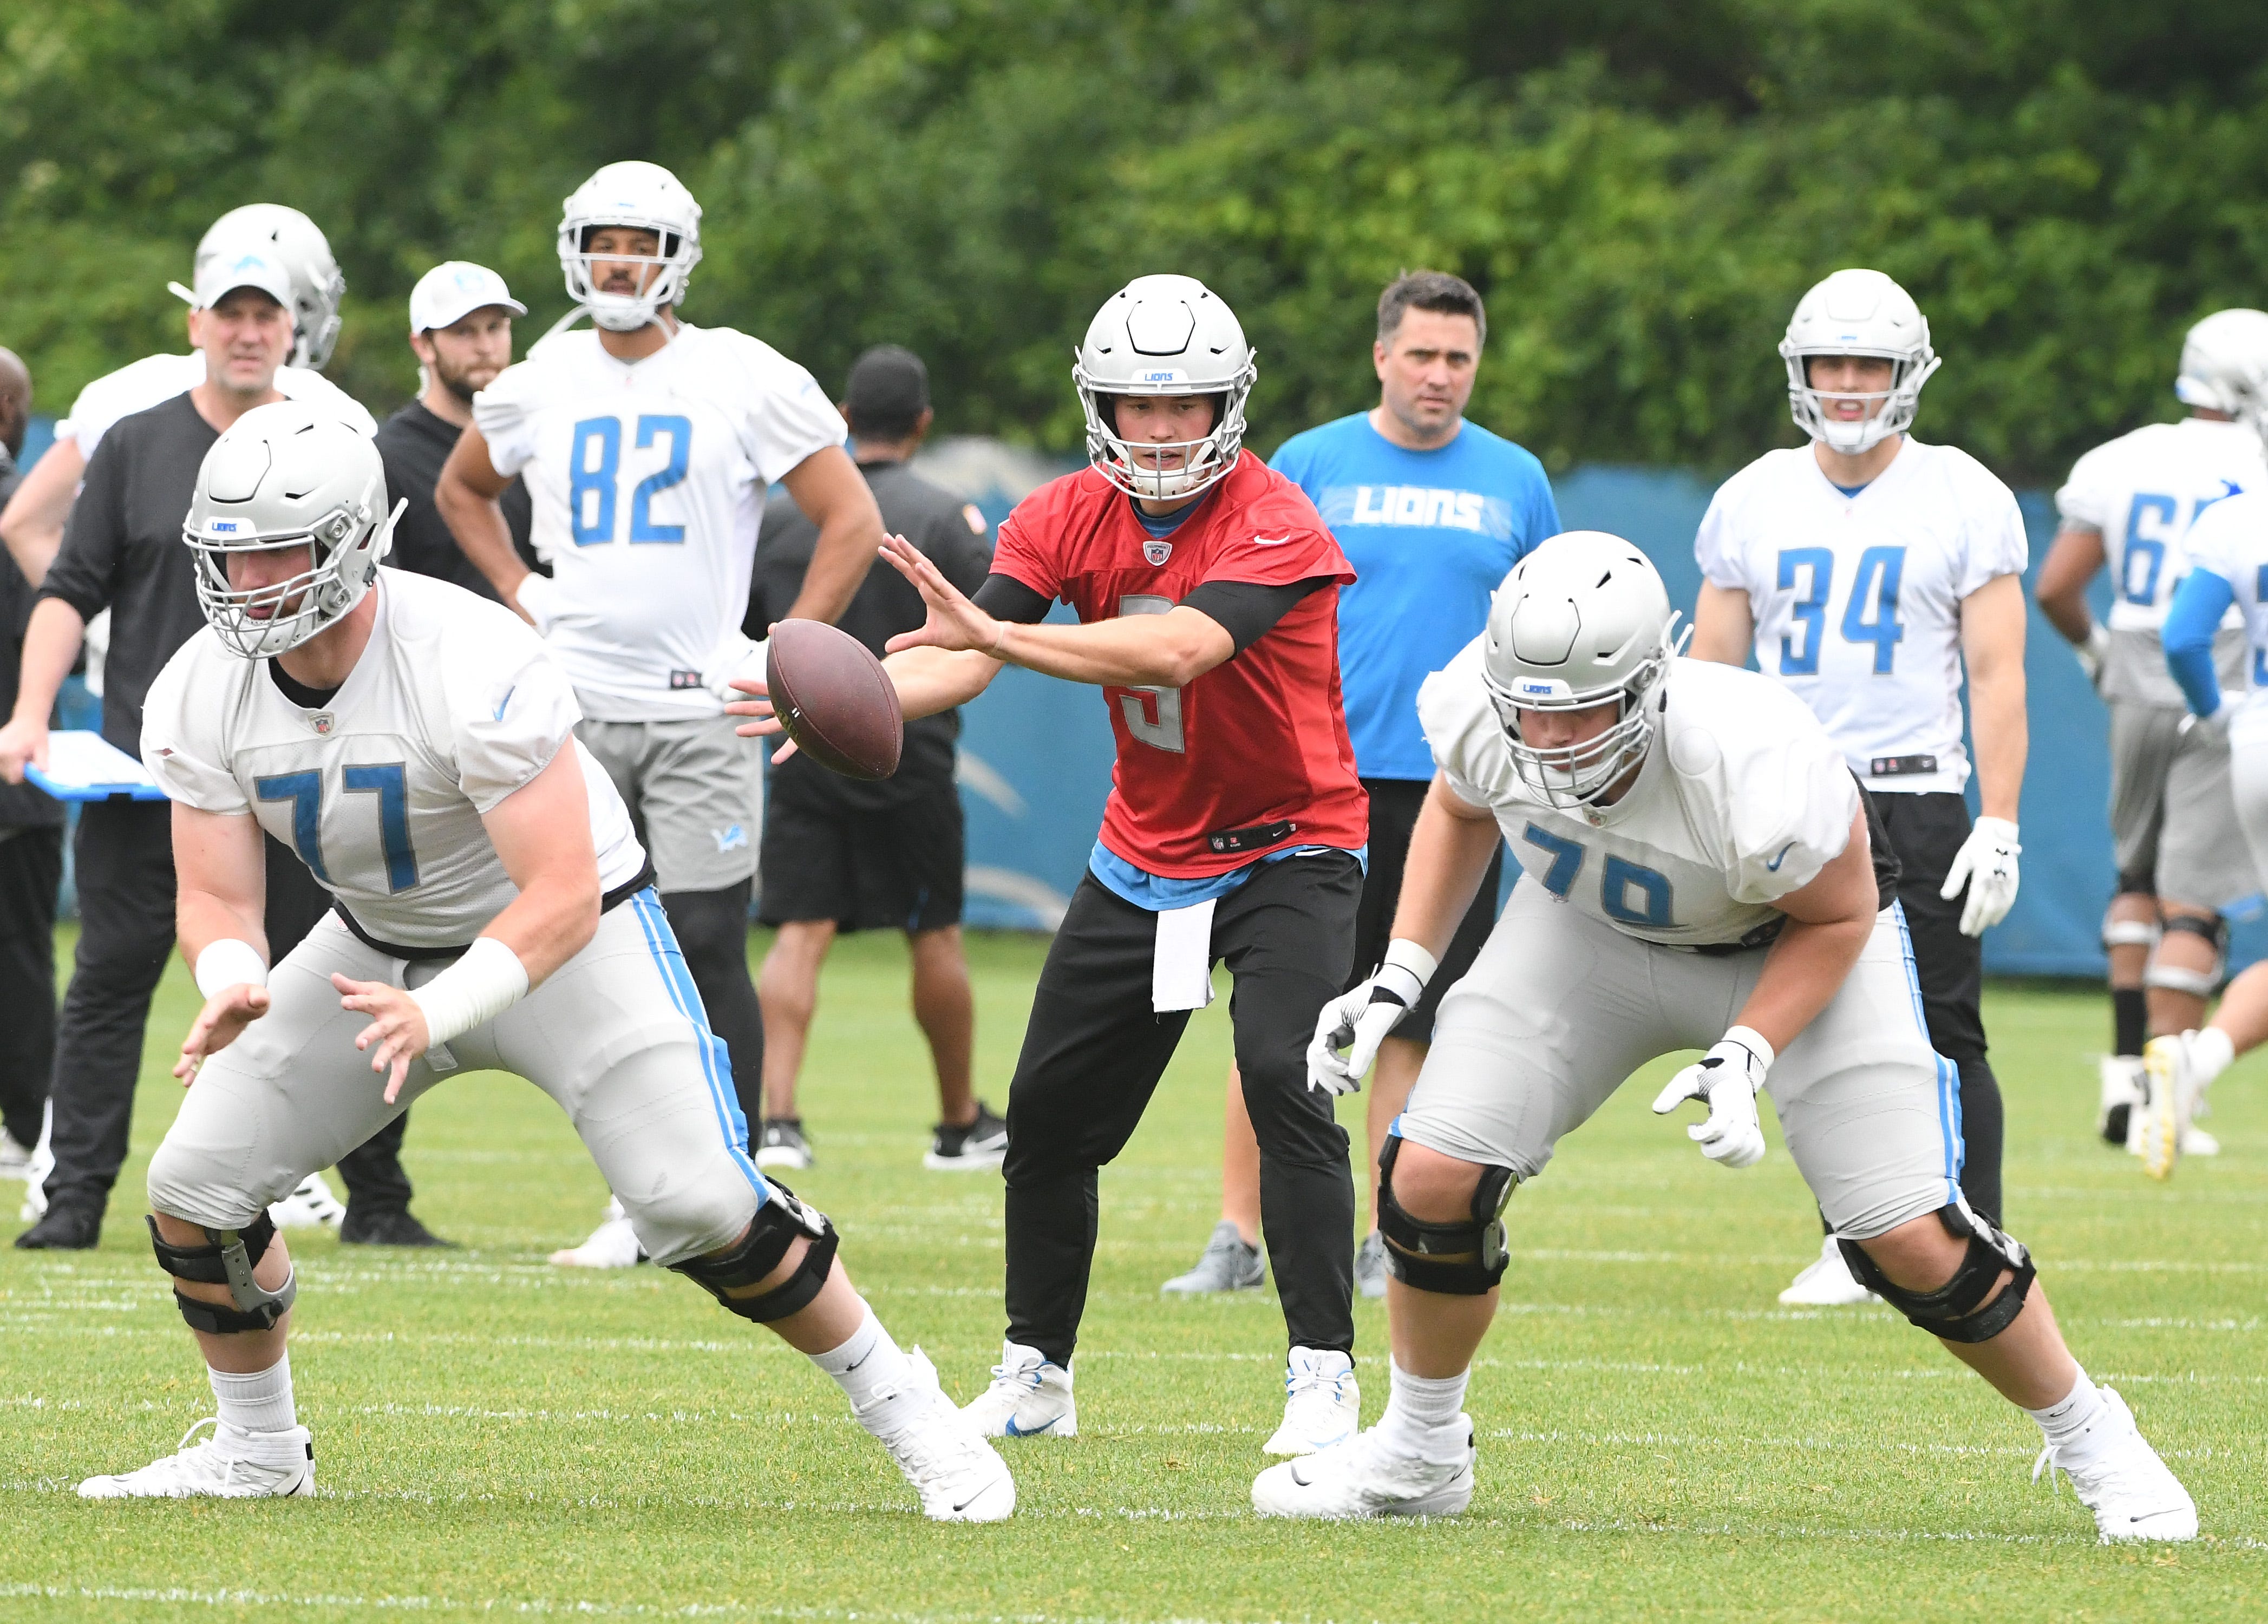 Lions quarterback Matthew Stafford in the pocket behind linemen Frank Ragnow and Kenny Wiggins during drills.